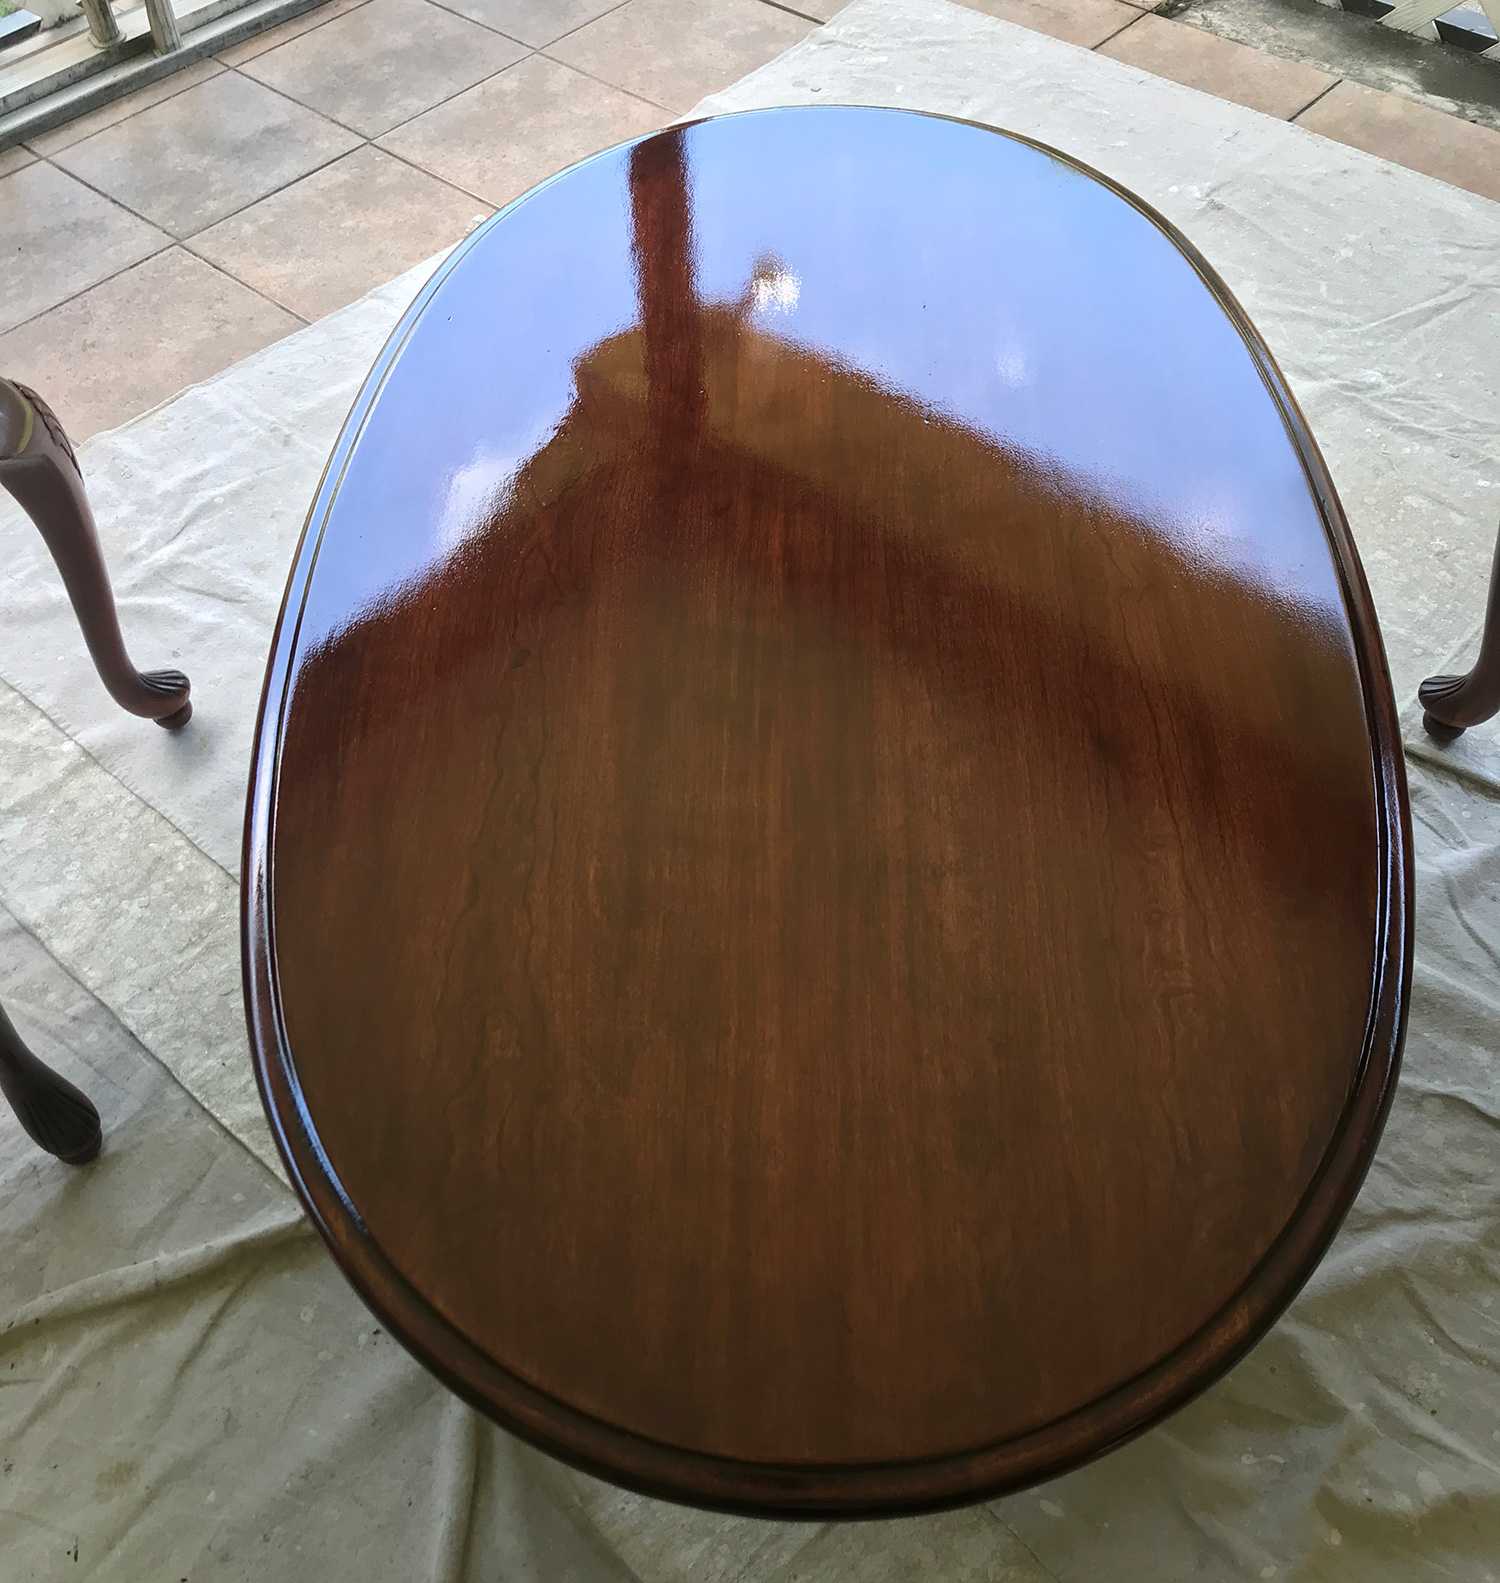 A Glossy high quality coffee table that has been restored to look brand new